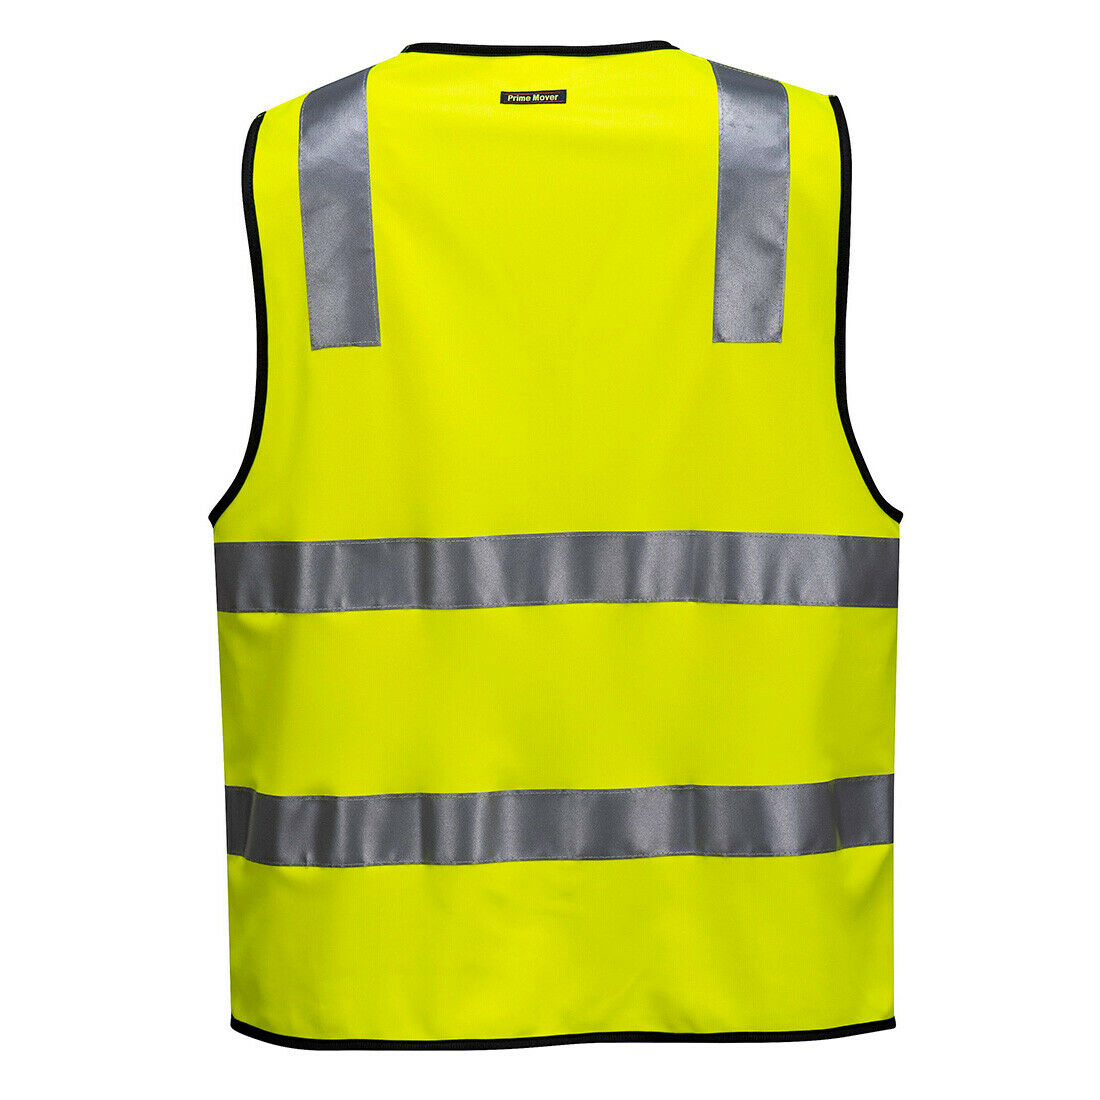 Portwest Mens Day or Night Safety Vest Taped Lightweight Reflective Safety MZ102